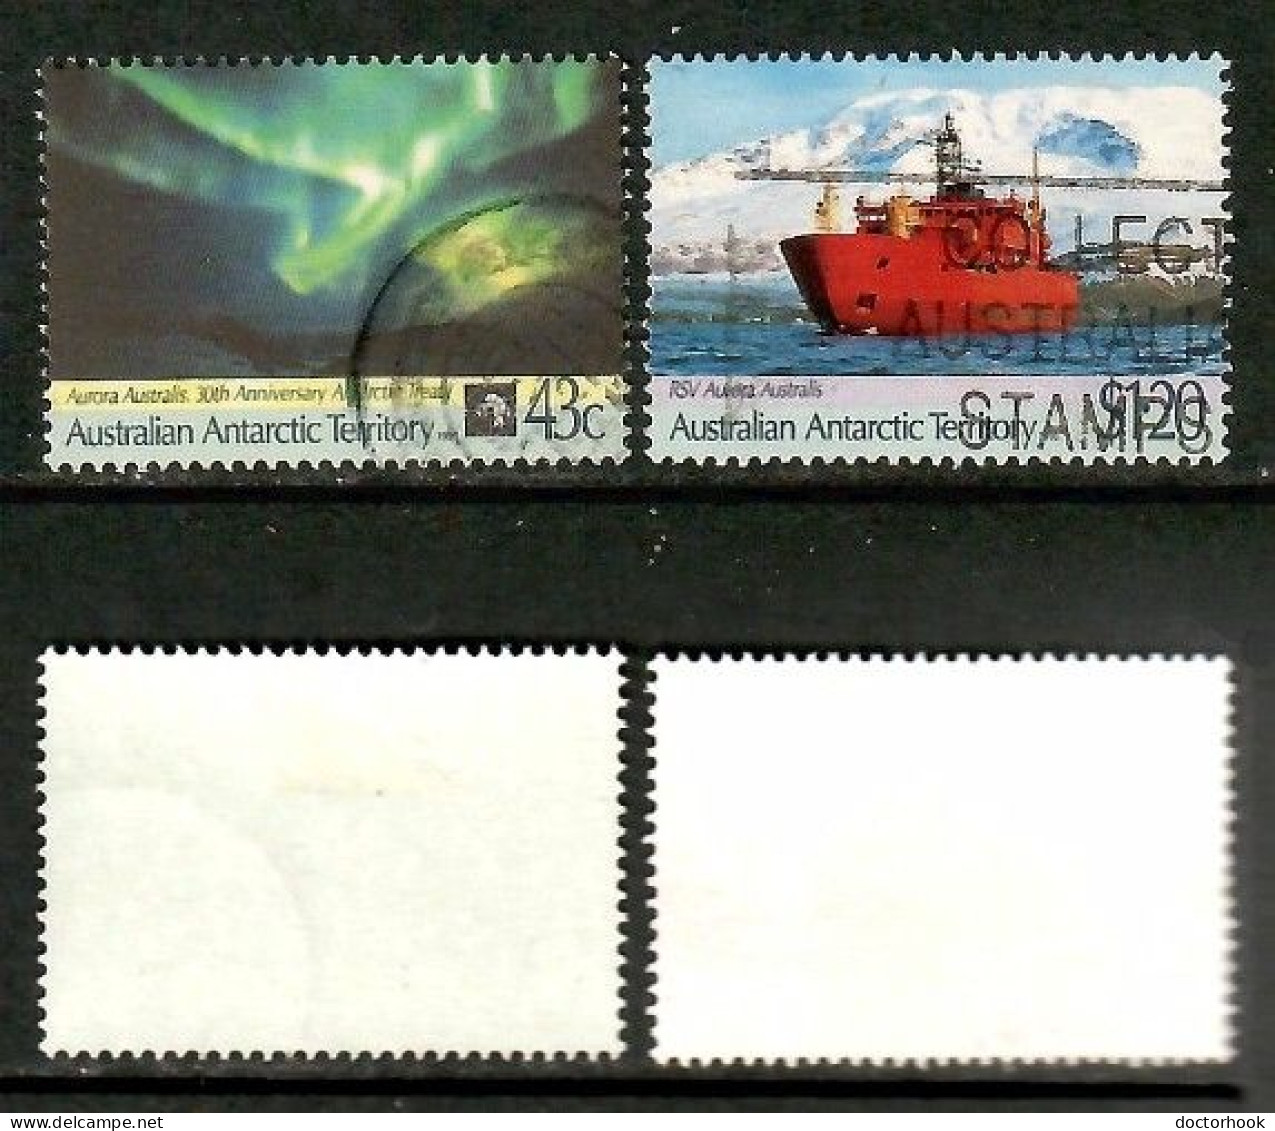 AUSTRALIAN ANTARCTIC TERRITORY   Scott # L 81-2 USED (CONDITION AS PER SCAN) (Stamp Scan # 1008-7) - Gebraucht